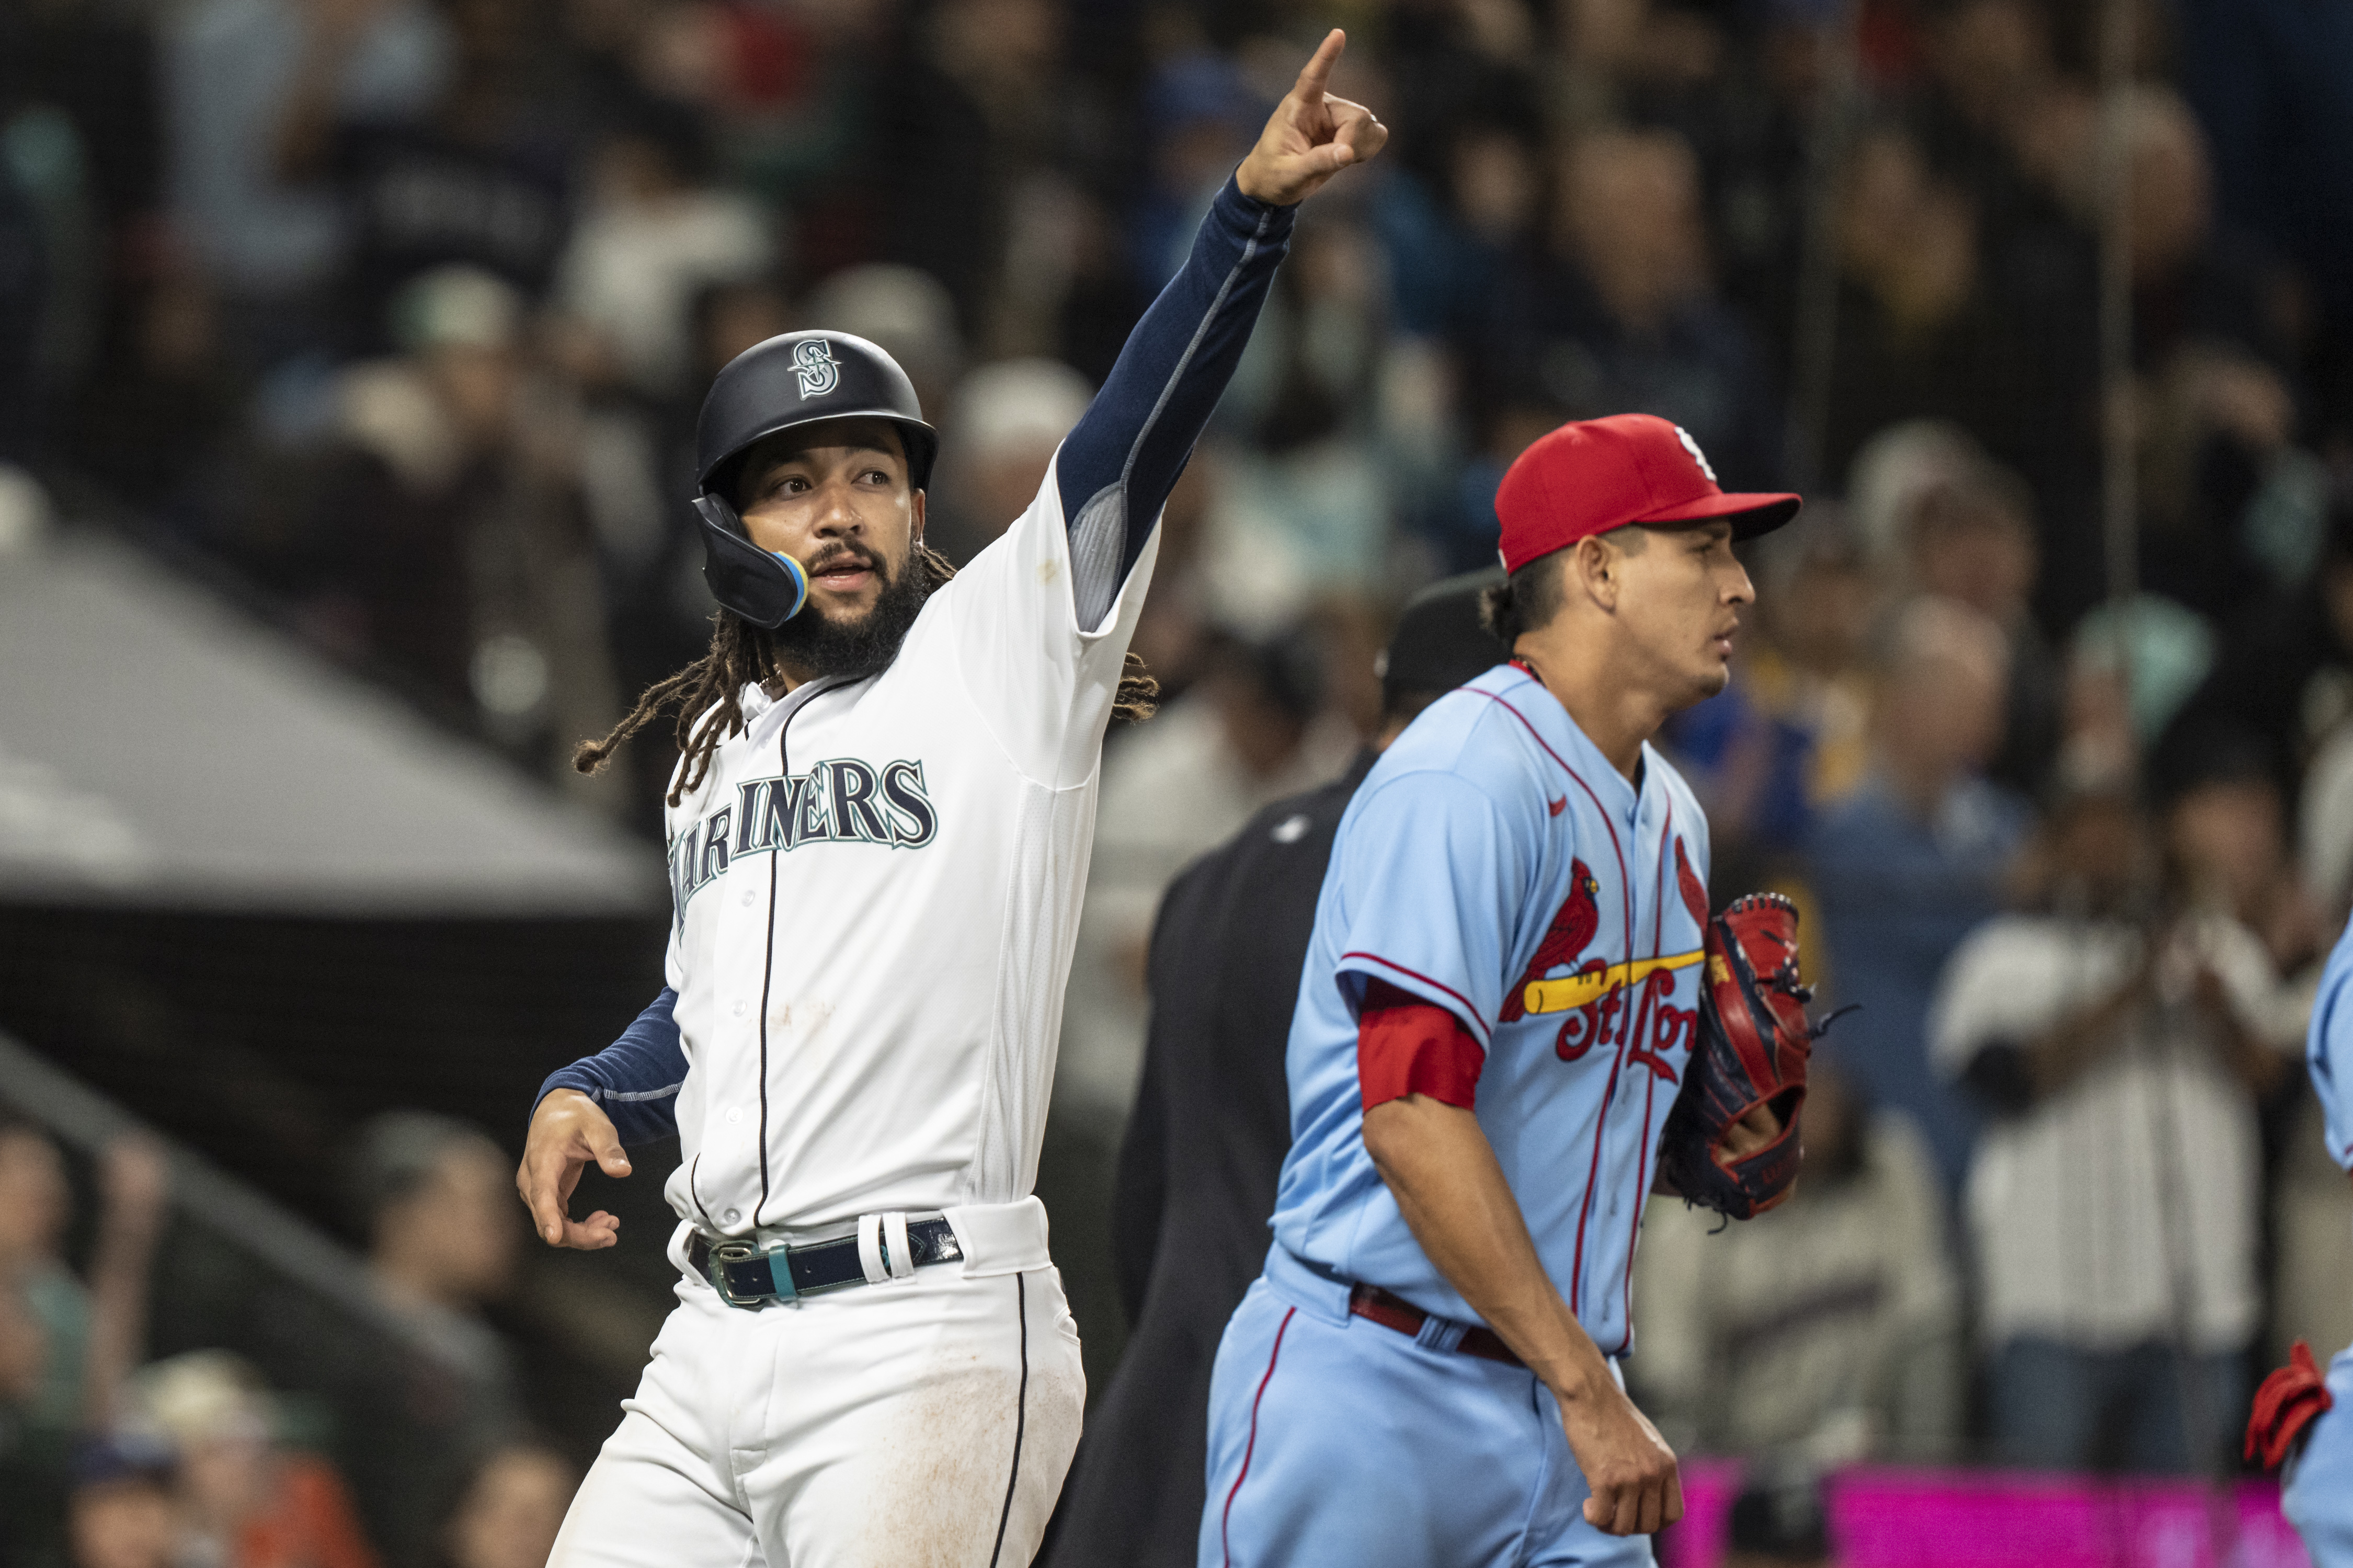 Seattle Mariners shortstop J.P. Crawford (3) gestures to third baseman Eugenio Suarez (28) after scoring a run during the seventh inning against the St. Louis Cardinals at T-Mobile Park.